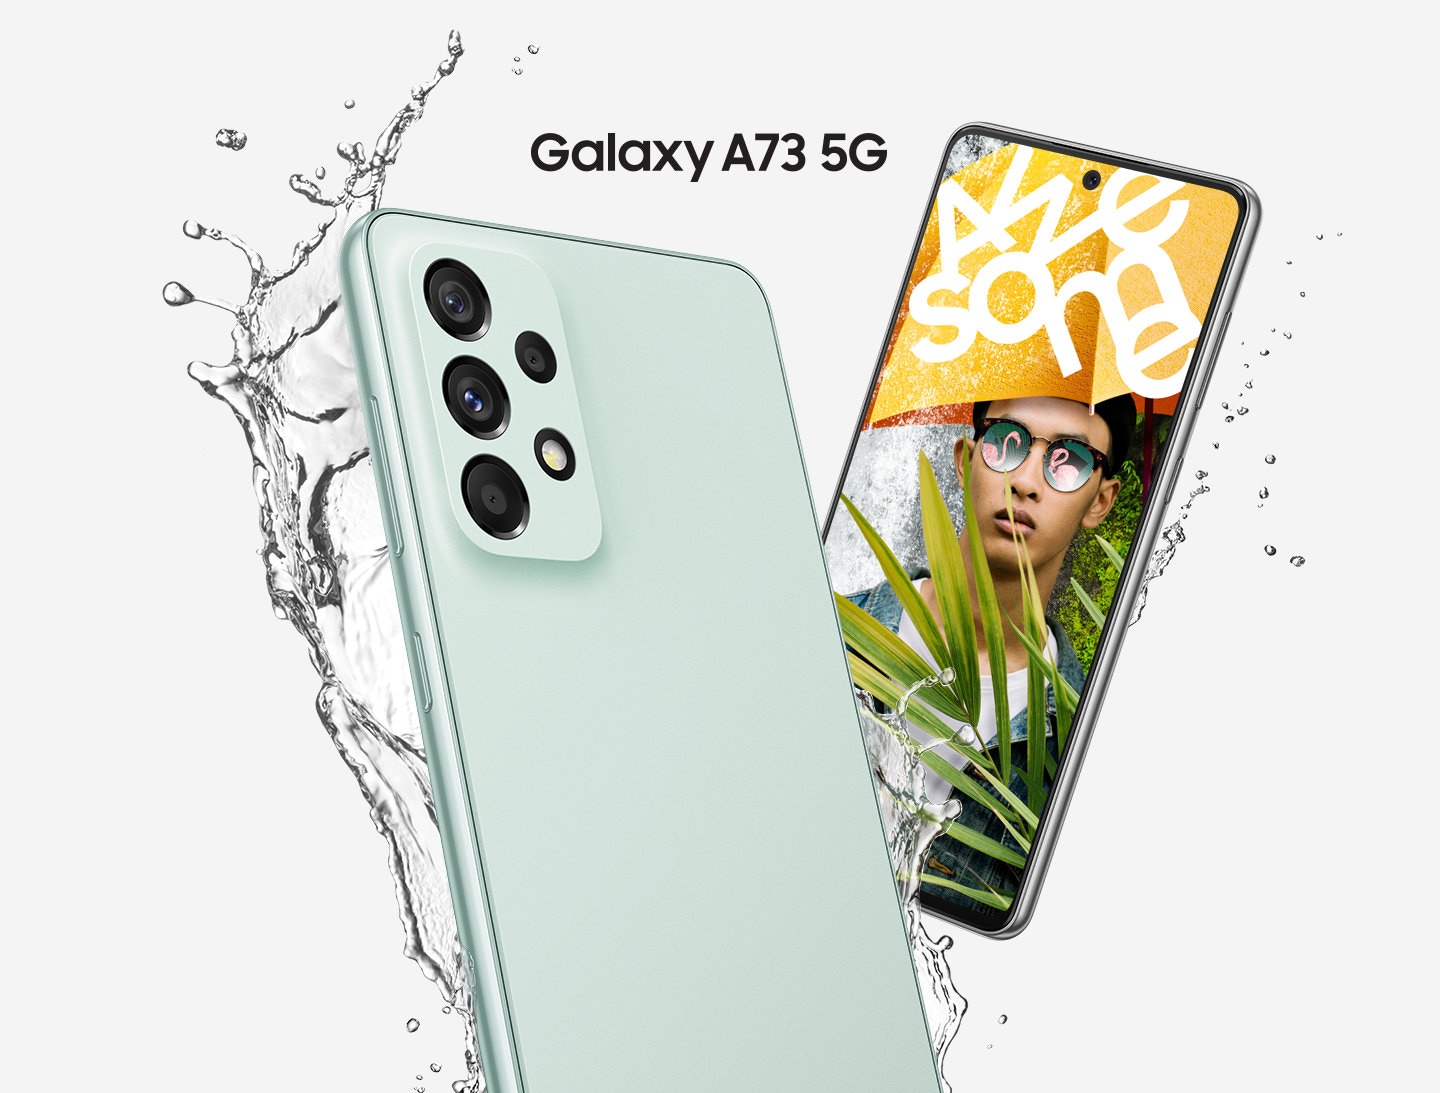 Two Galaxy A73 5G devices, in Awesome Mint, are shown with one device showing the back and the other showing the front. Water is being splashed to display the water-resistance while the front-siding device shows a man wearing a yellow umbrella that has Awesome written in white text.